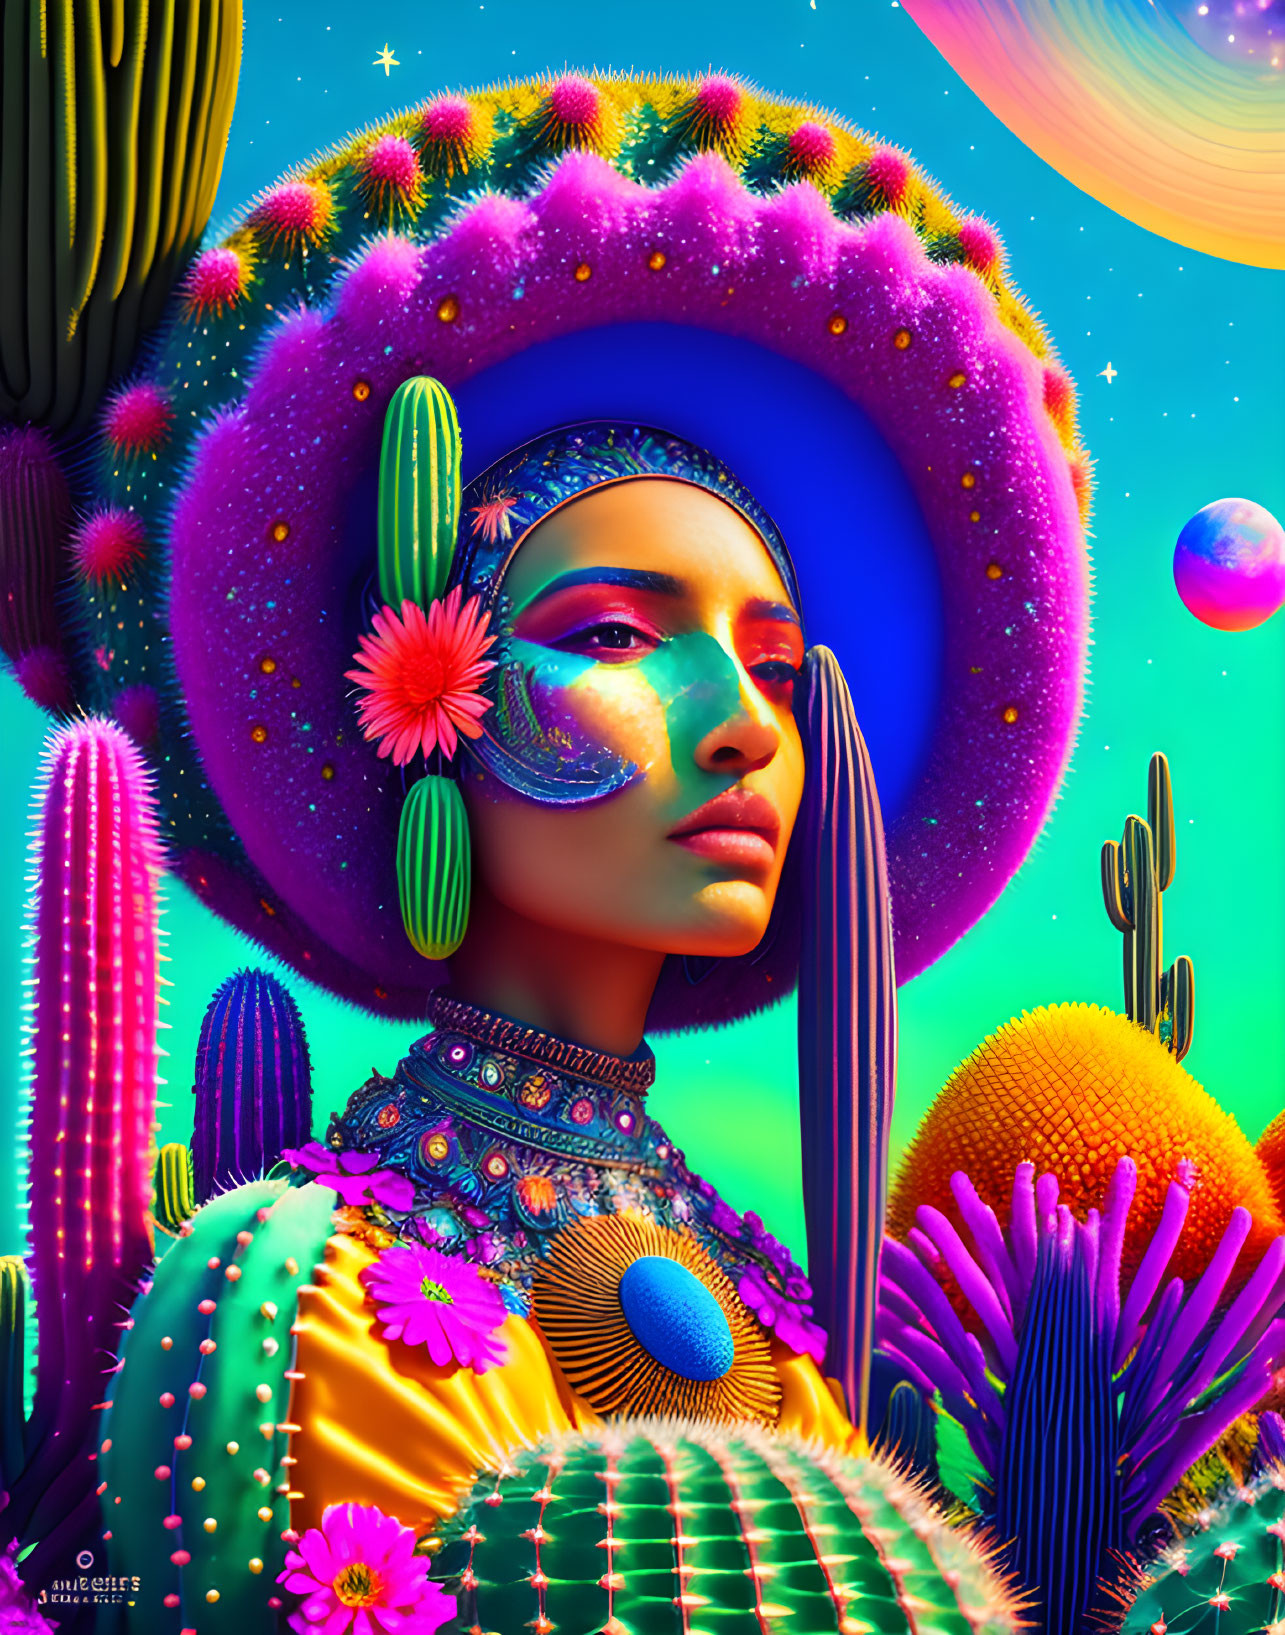 Cactus Woman of the Desert of my Mind